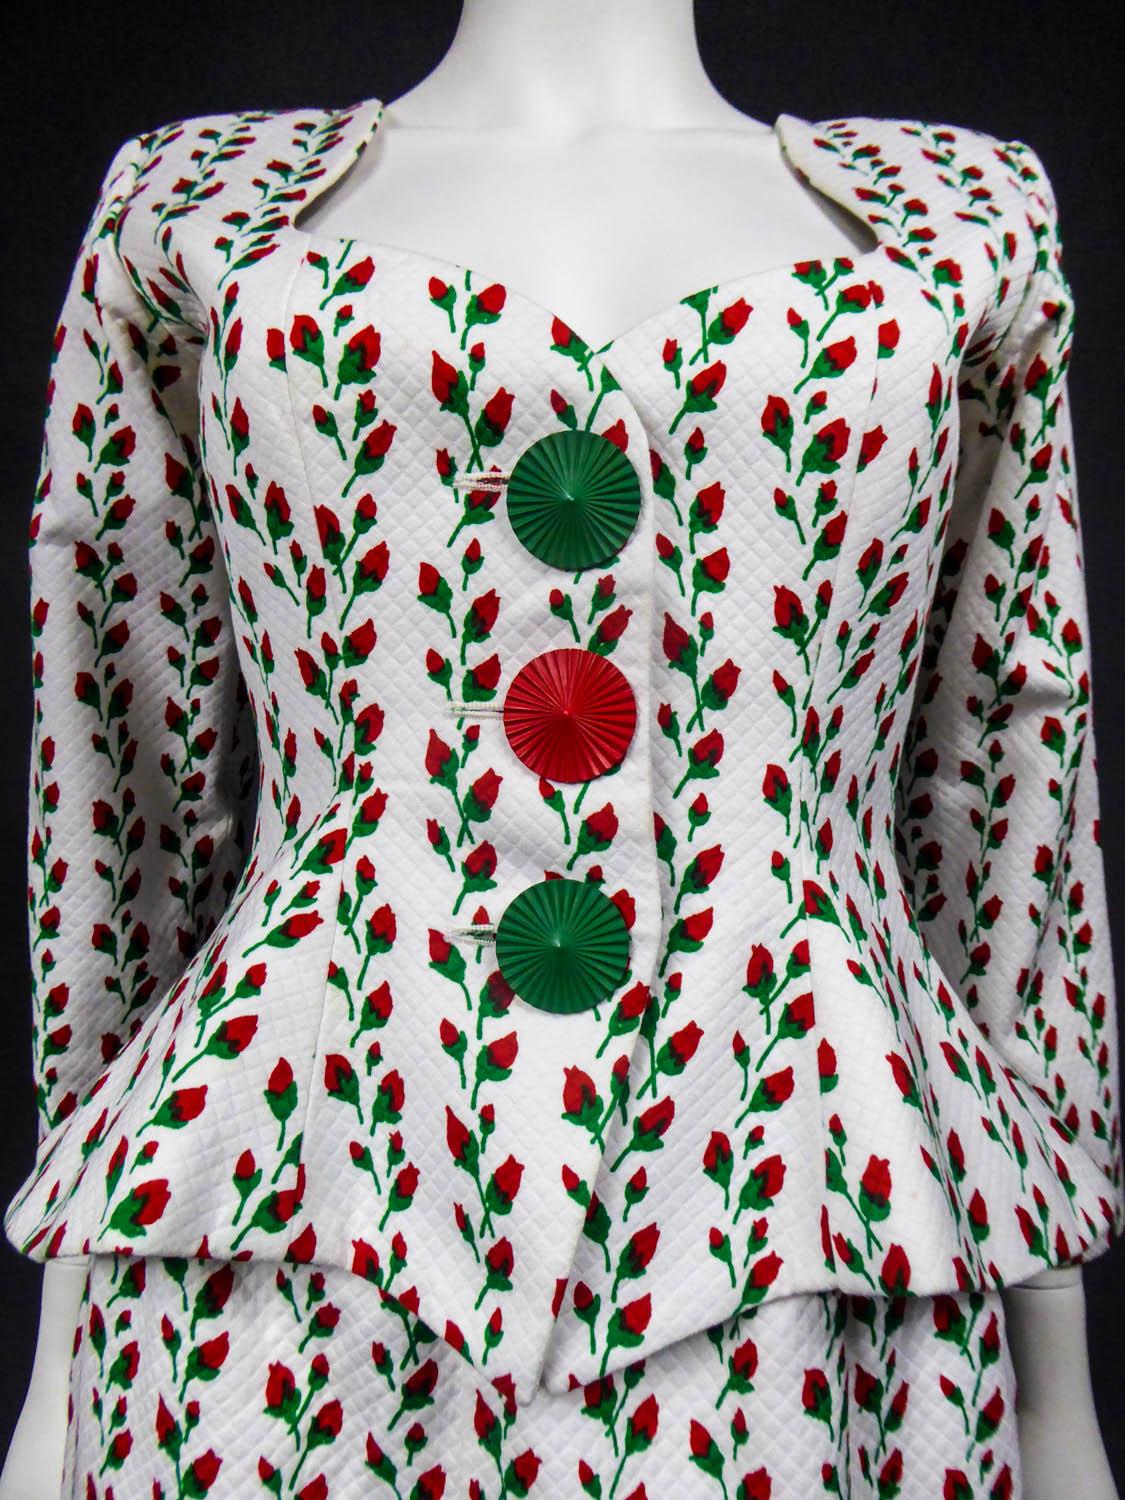 Circa 1980
France

Yves Saint Laurent Rive Gauche skirt suit in quilted white cotton piqué printed red roses buttons in garland. Slim-fitting jacket with a pronounced cut on the hips and a wavy neckline that enhances the chest. Small epaulettes and